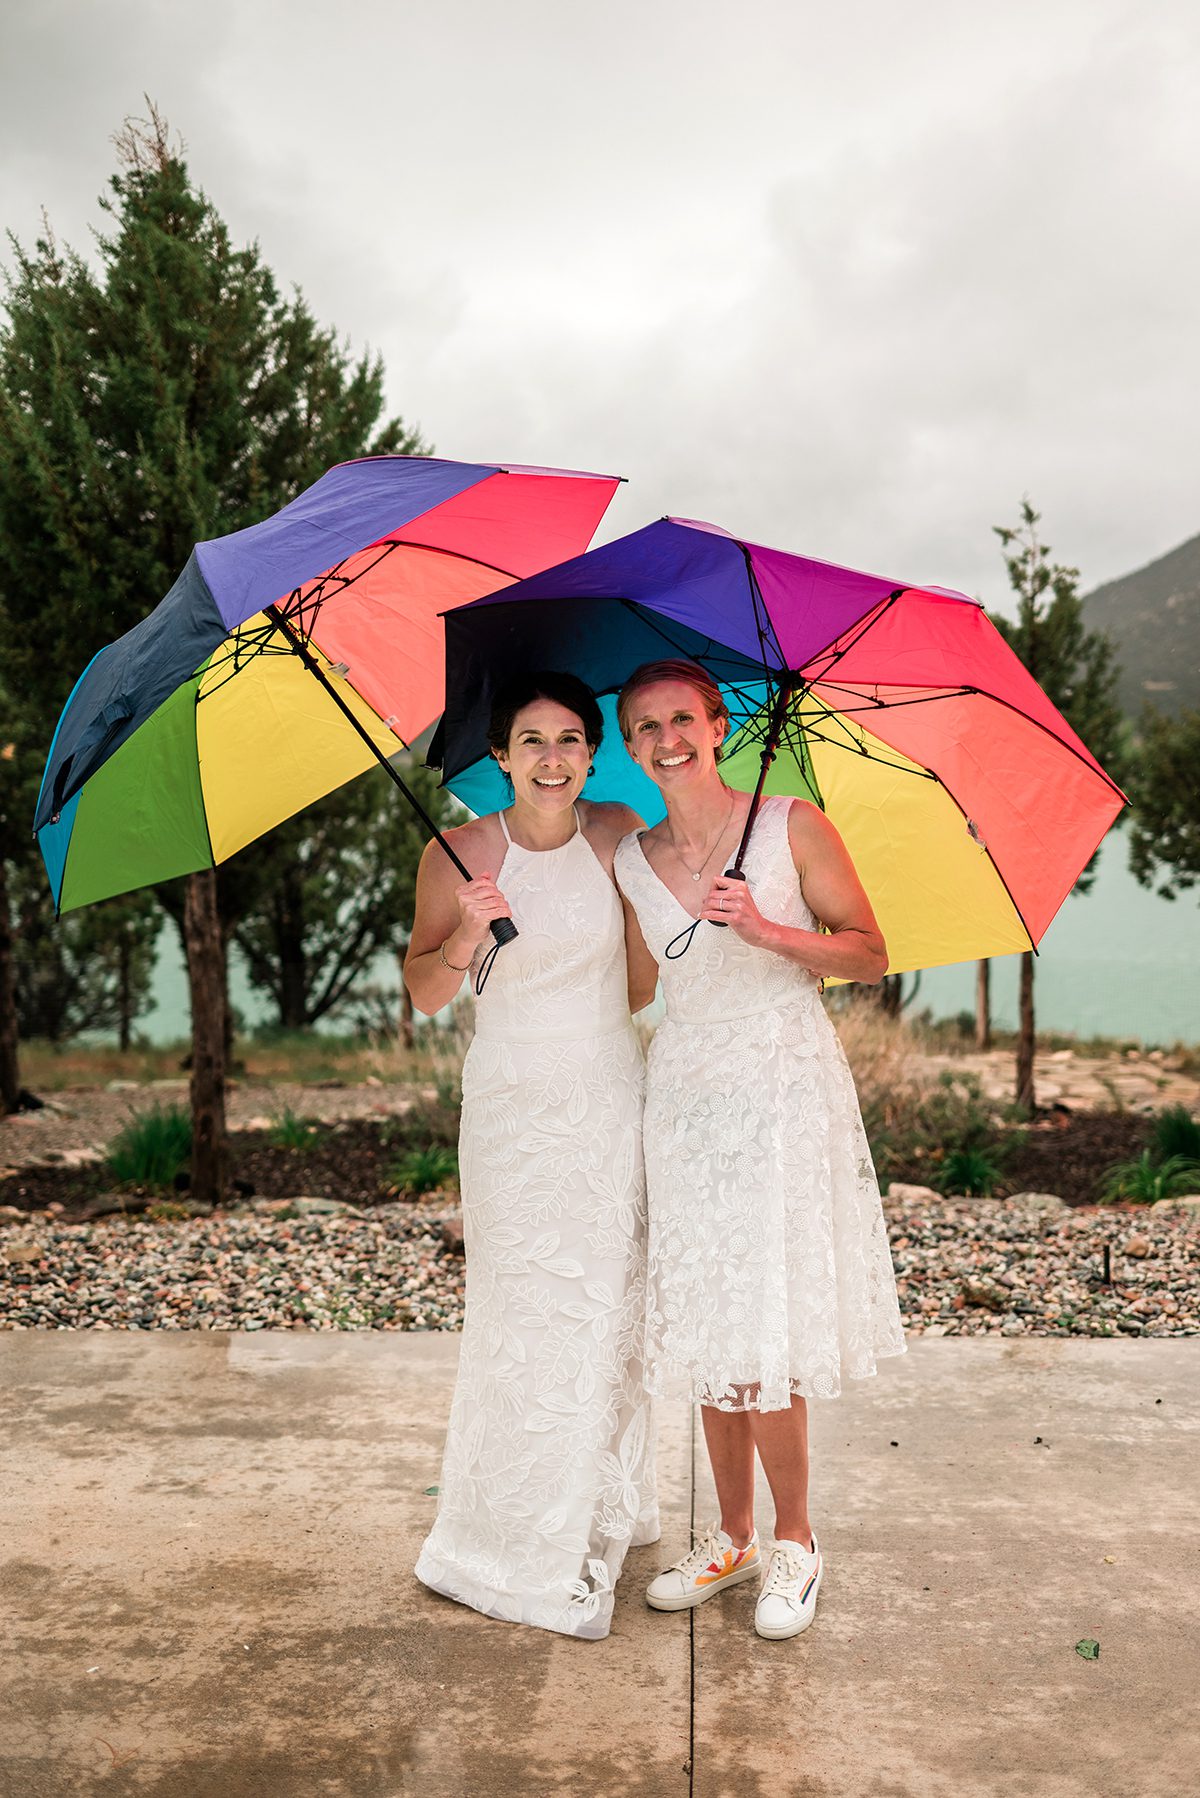 Two brides pose in the rain with rainbow umbrellas| Rainy Wedding at Vista View Events